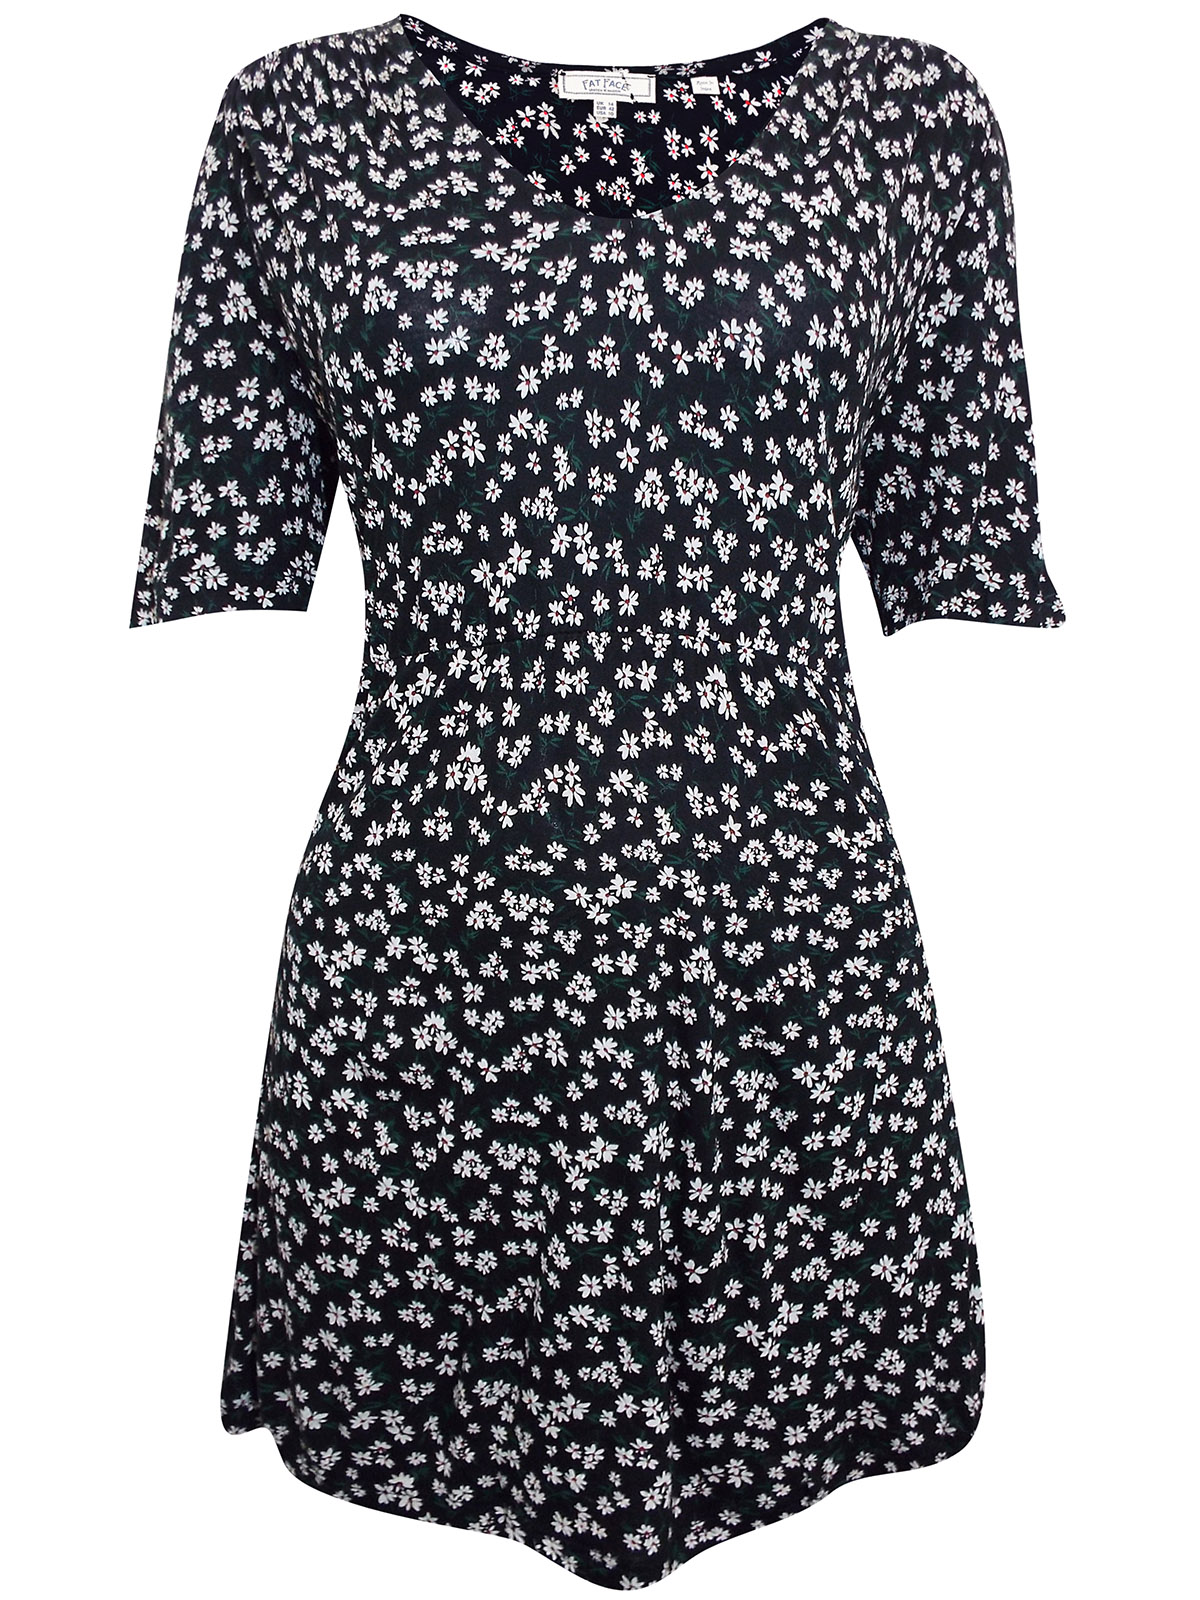 FAT FACE - - Fat Face BLACK Pure Cotton Printed Shirred Shoulder Top ...